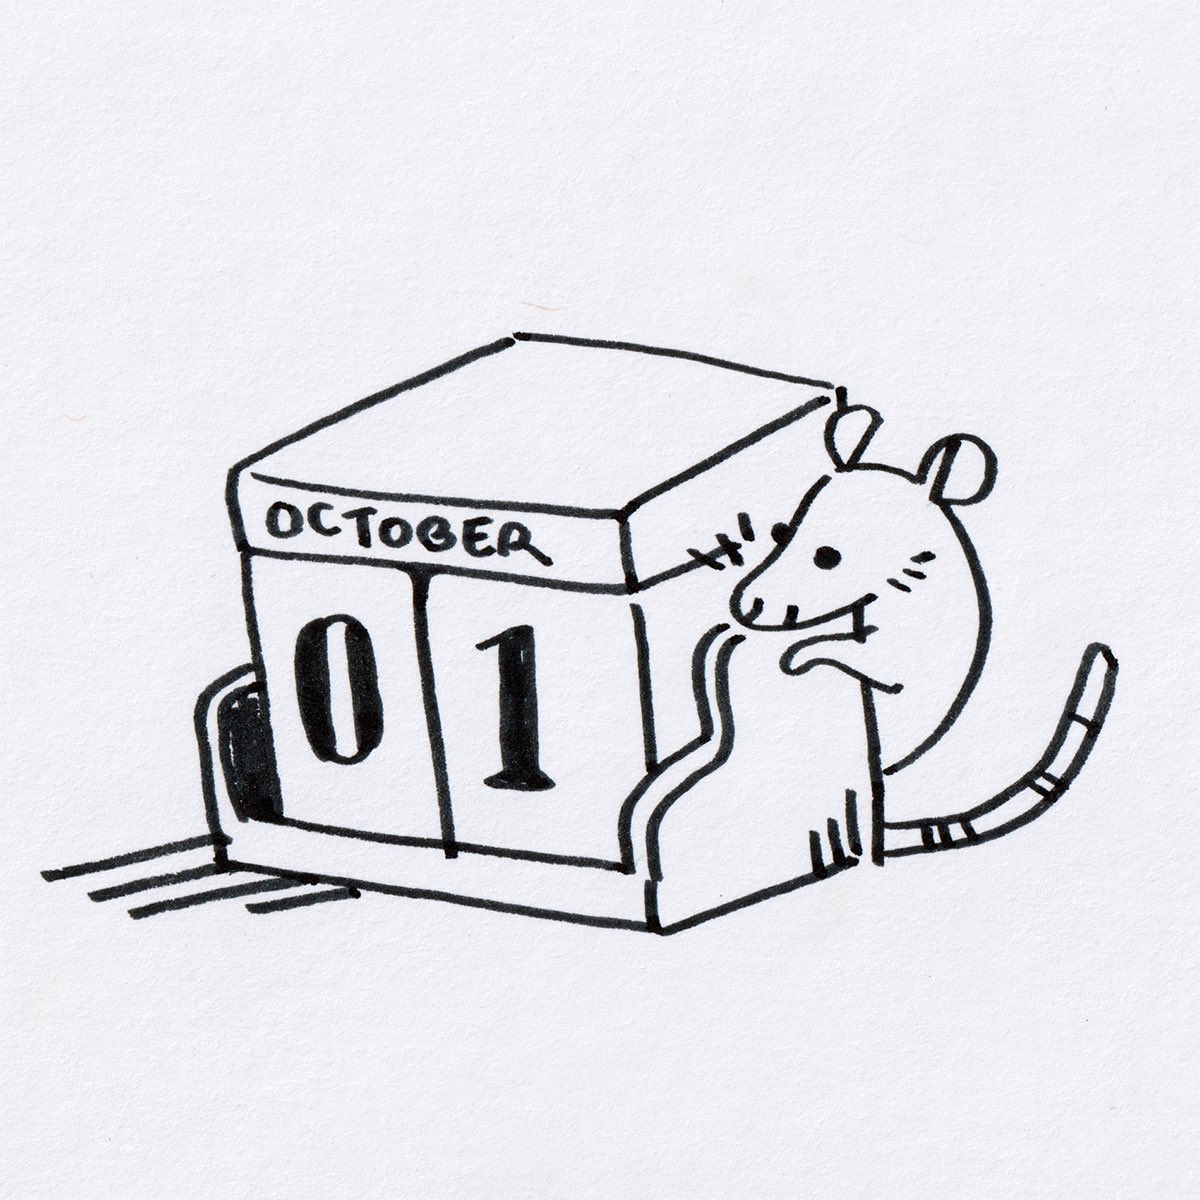 Happy Rattober! Working on my pieces today, in the meantime is a little calendar block boy I made for the FAQ. Even if not all for prompts, I’ve been swimming in Rattober art 🥰